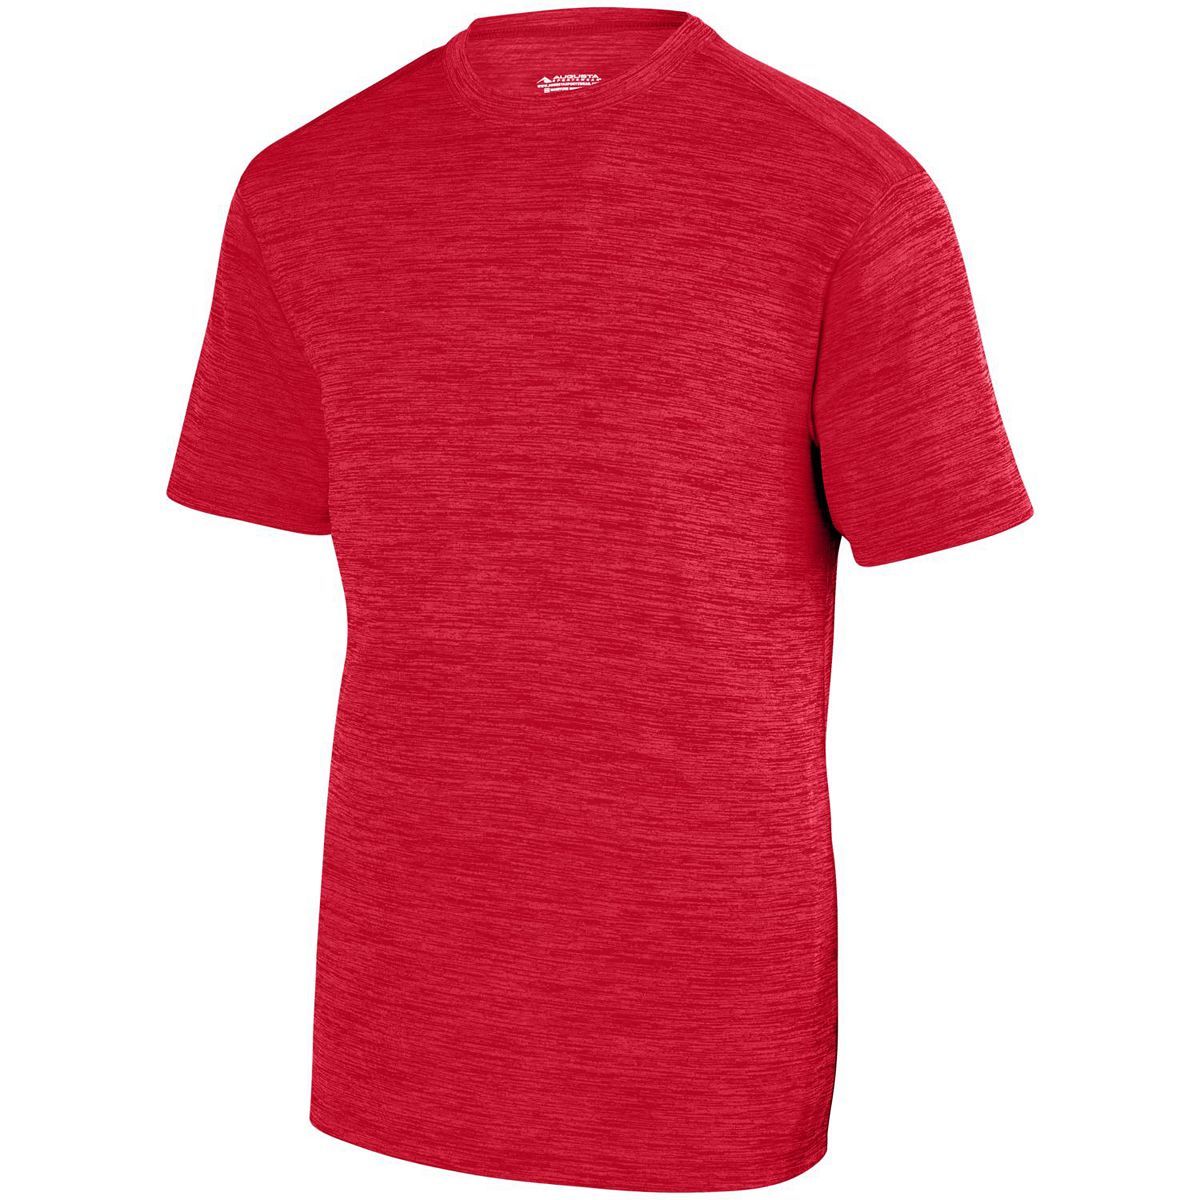 Augusta Sportswear Shadow Tonal Heather Training Tee in Red  -Part of the Adult, Adult-Tee-Shirt, T-Shirts, Augusta-Products, Shirts, Tonal-Fleece-Collection product lines at KanaleyCreations.com